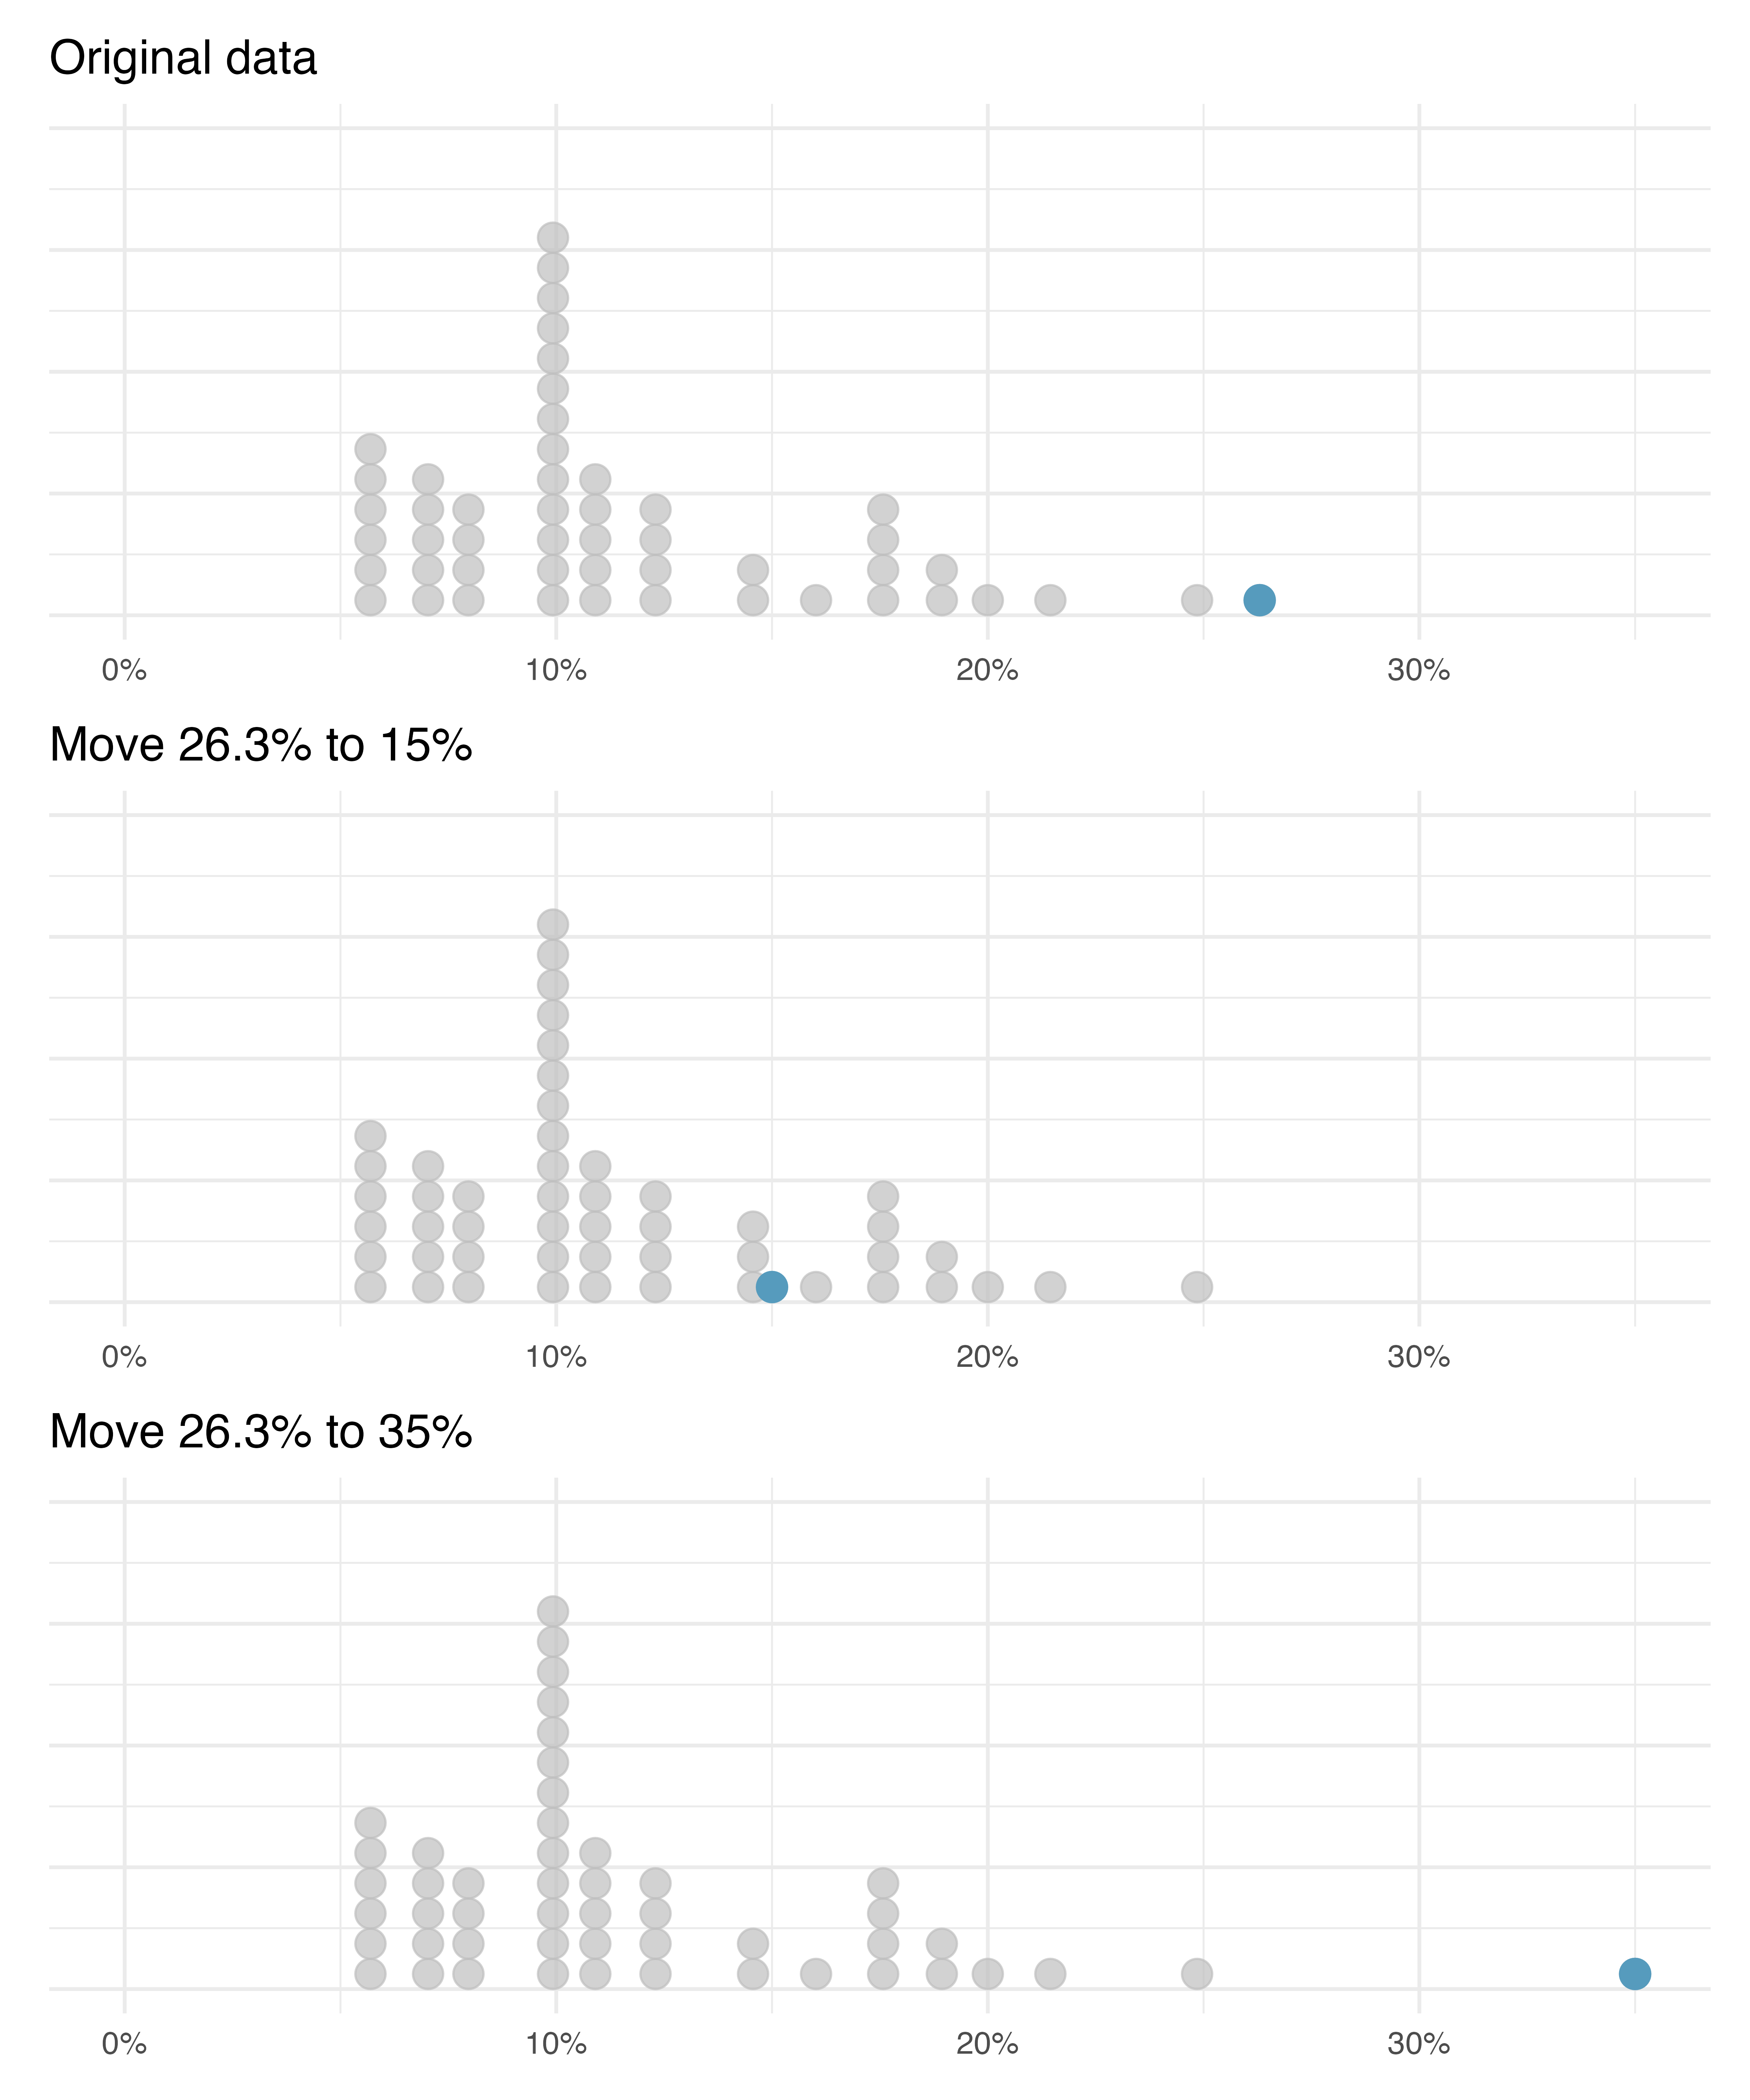 Three dot plots are displayed where a single point is highlighted. In the top plot is the original data where the highlighted point is the largest value, at 26.3%.  The second plot shows the distribution of the interest rate data after moving the highlighted point from 26.3% to 15%.  The third plot shows the distribution of the interest rate data after moving the highlighted point from 26.3% to 35%.  The corresponding change in statistics are given in @tbl--robustOrNotTable.